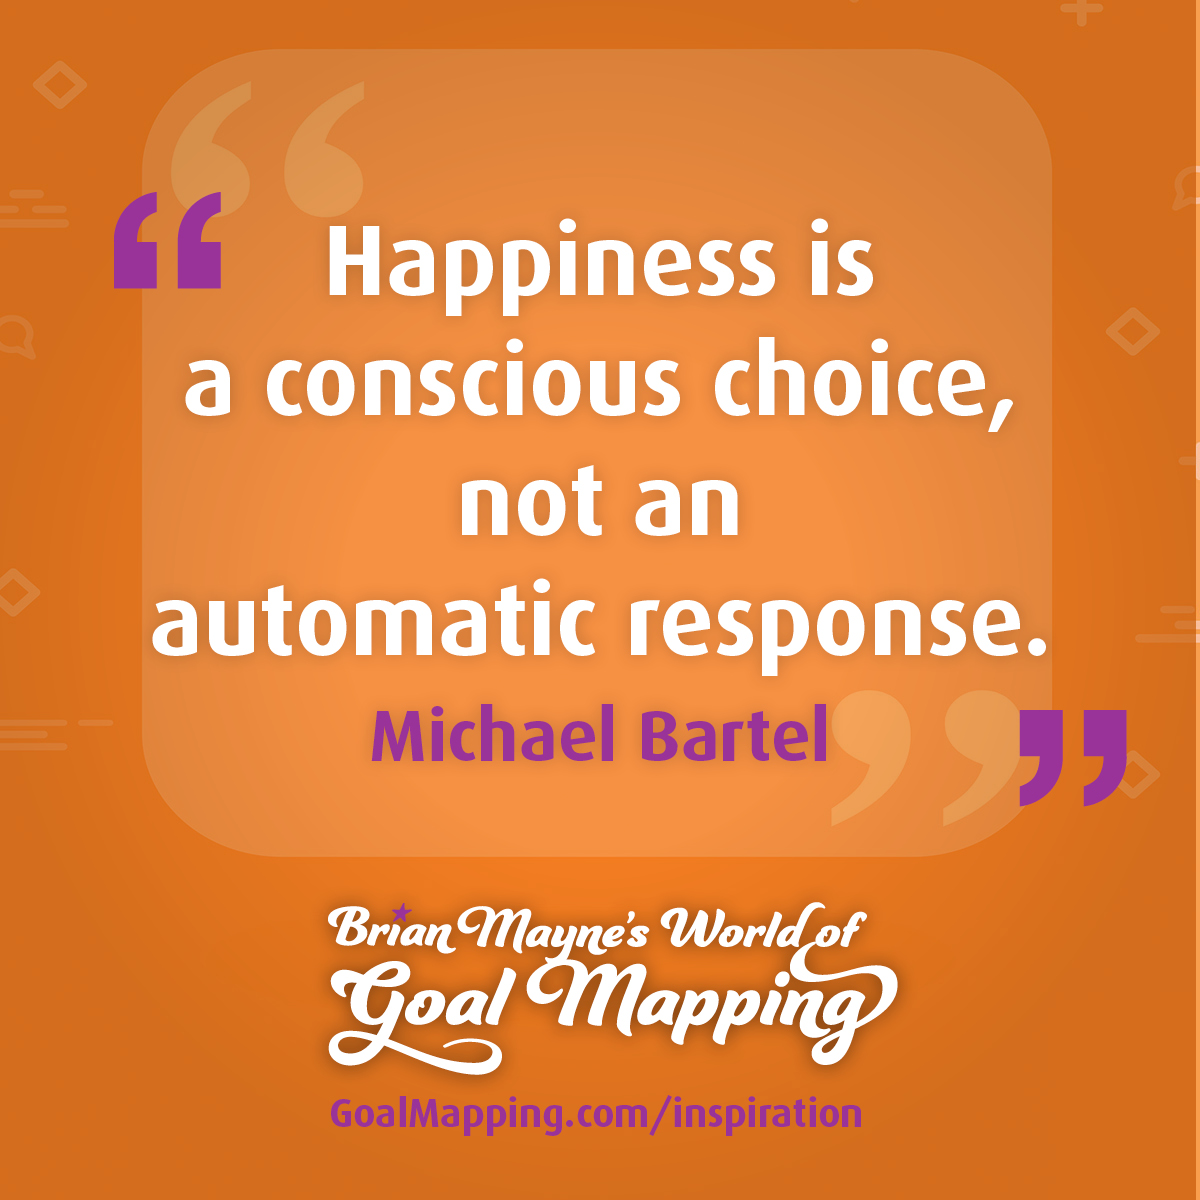 "Happiness is a conscious choice, not an automatic response." Michael Bartel